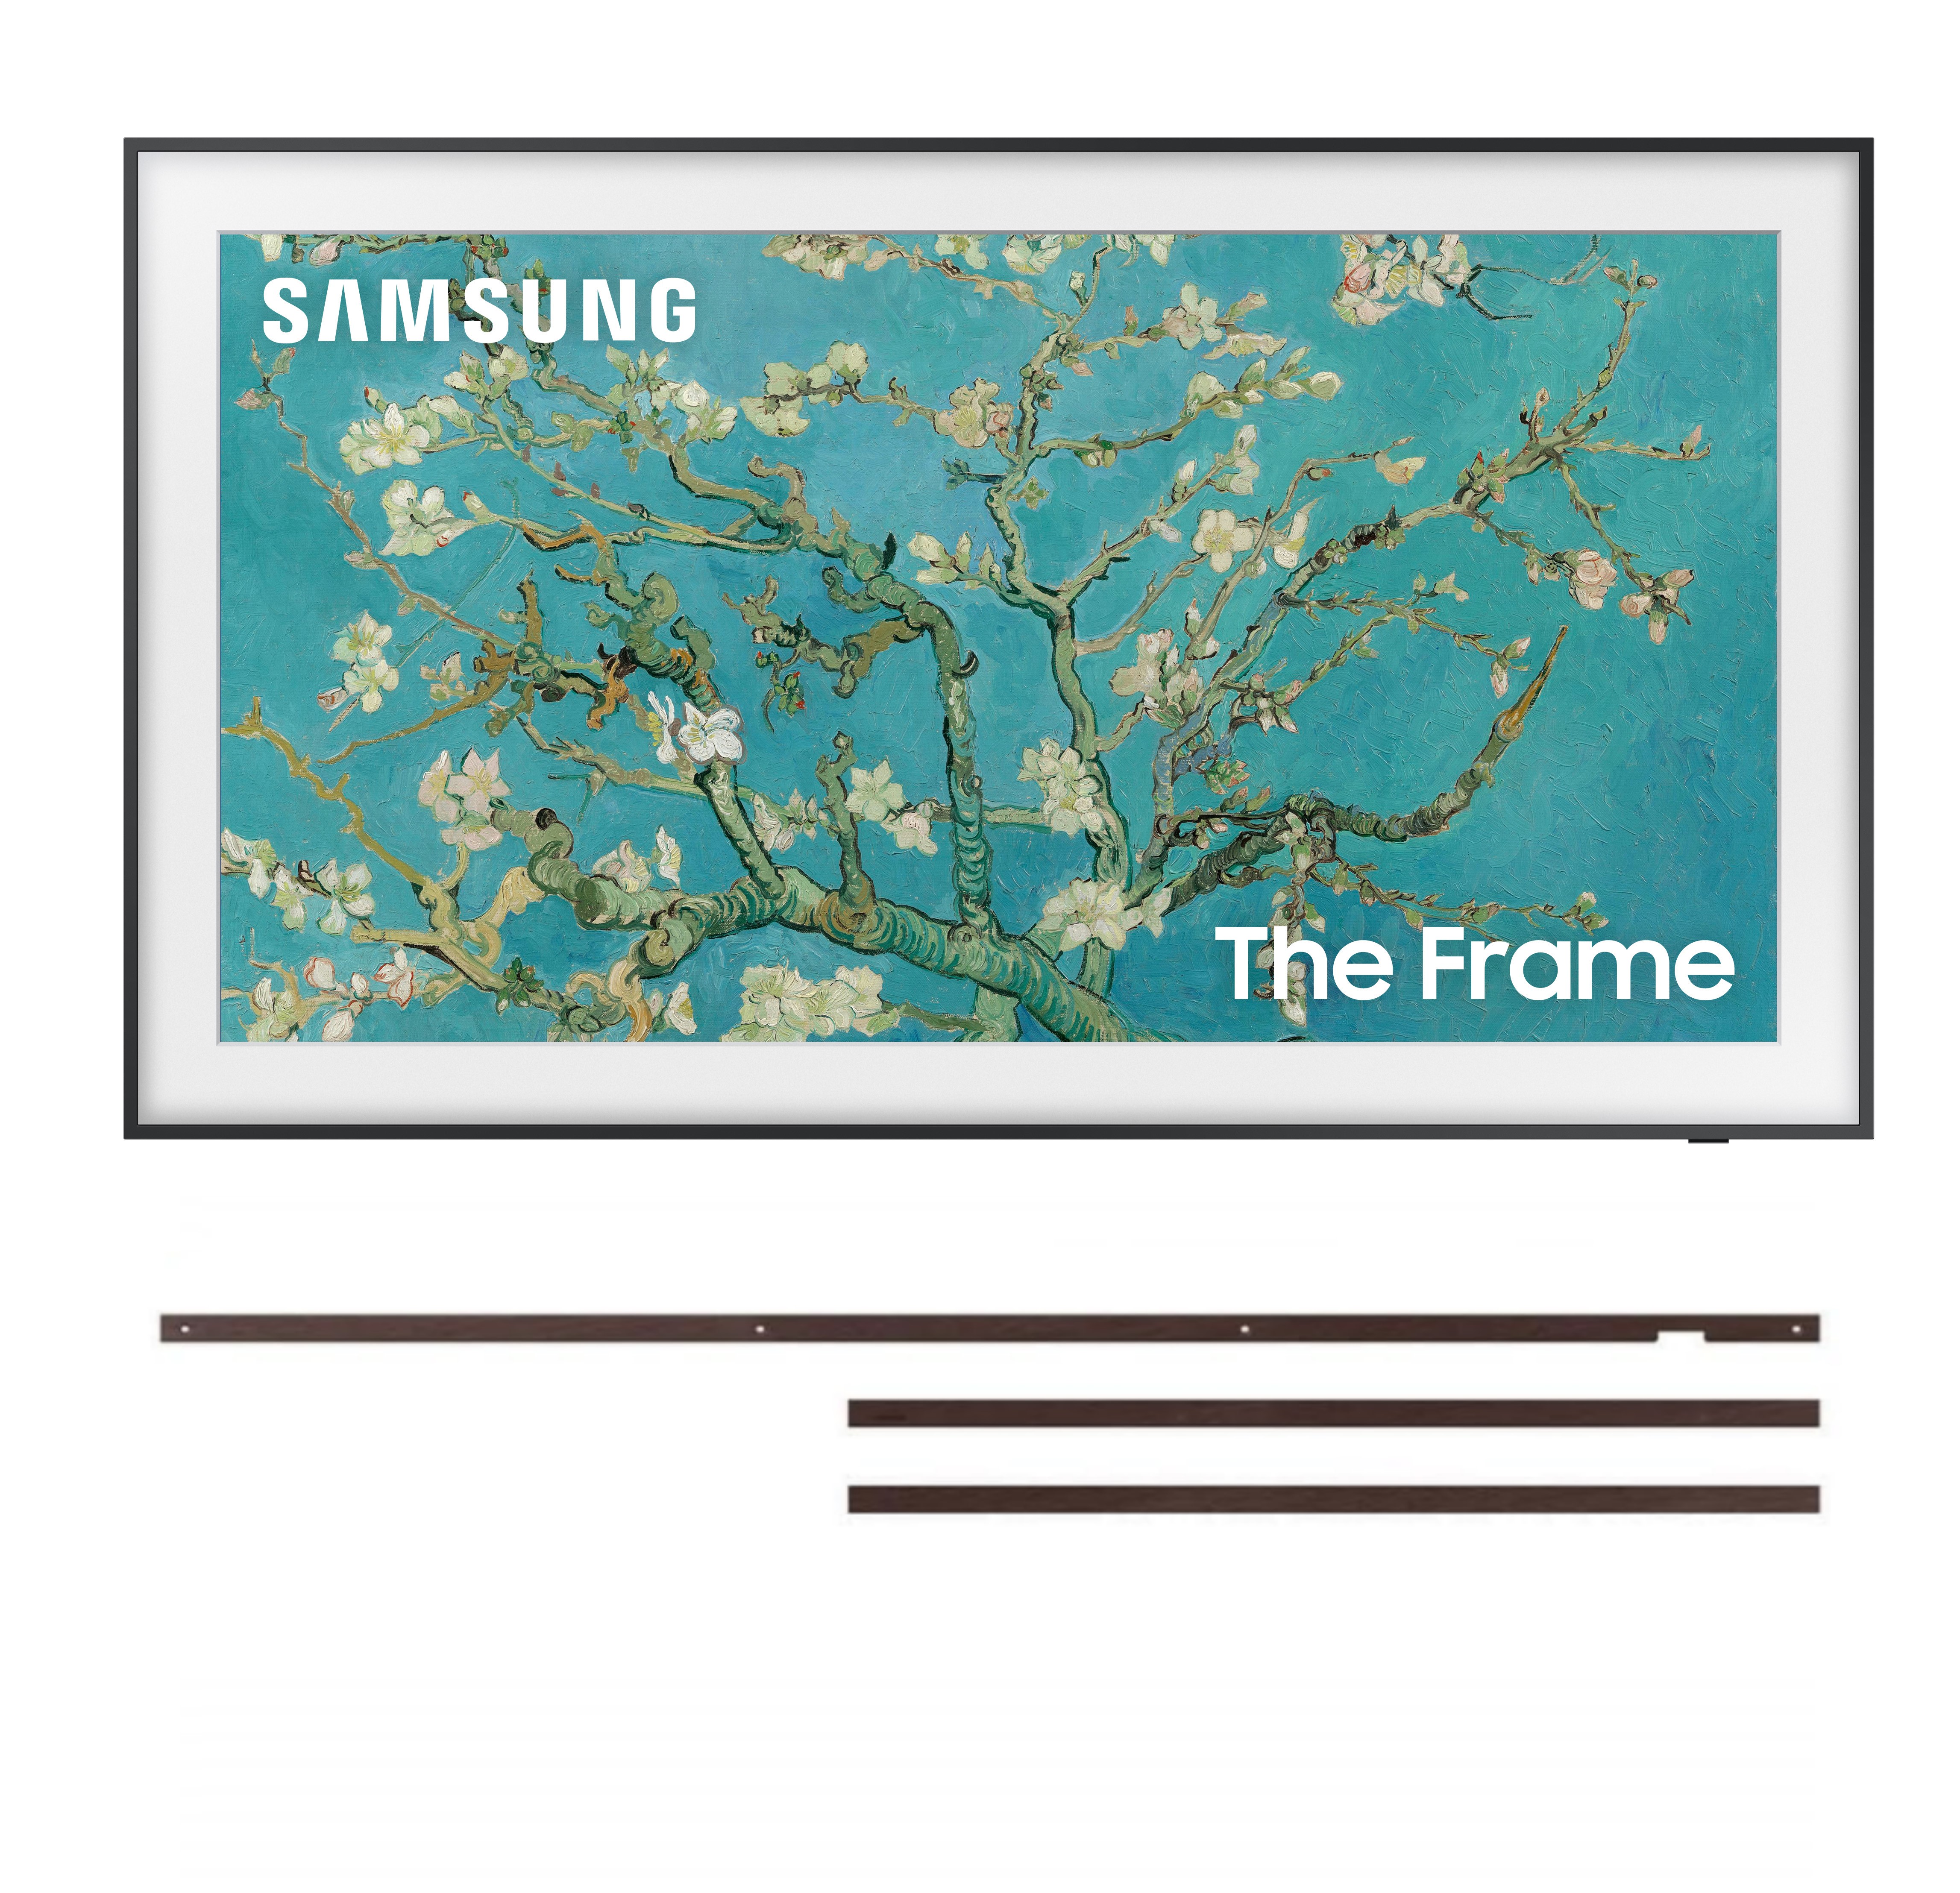 SAMSUNG 85-Inch Class QLED 4K LS03B Series The Frame Quantum HDR Smart TV with a SAMSUNG 85” The Frame Customizable Bezel for TV, Modern Brown, VG-SCFA85BWBZA (2022) - image 1 of 9